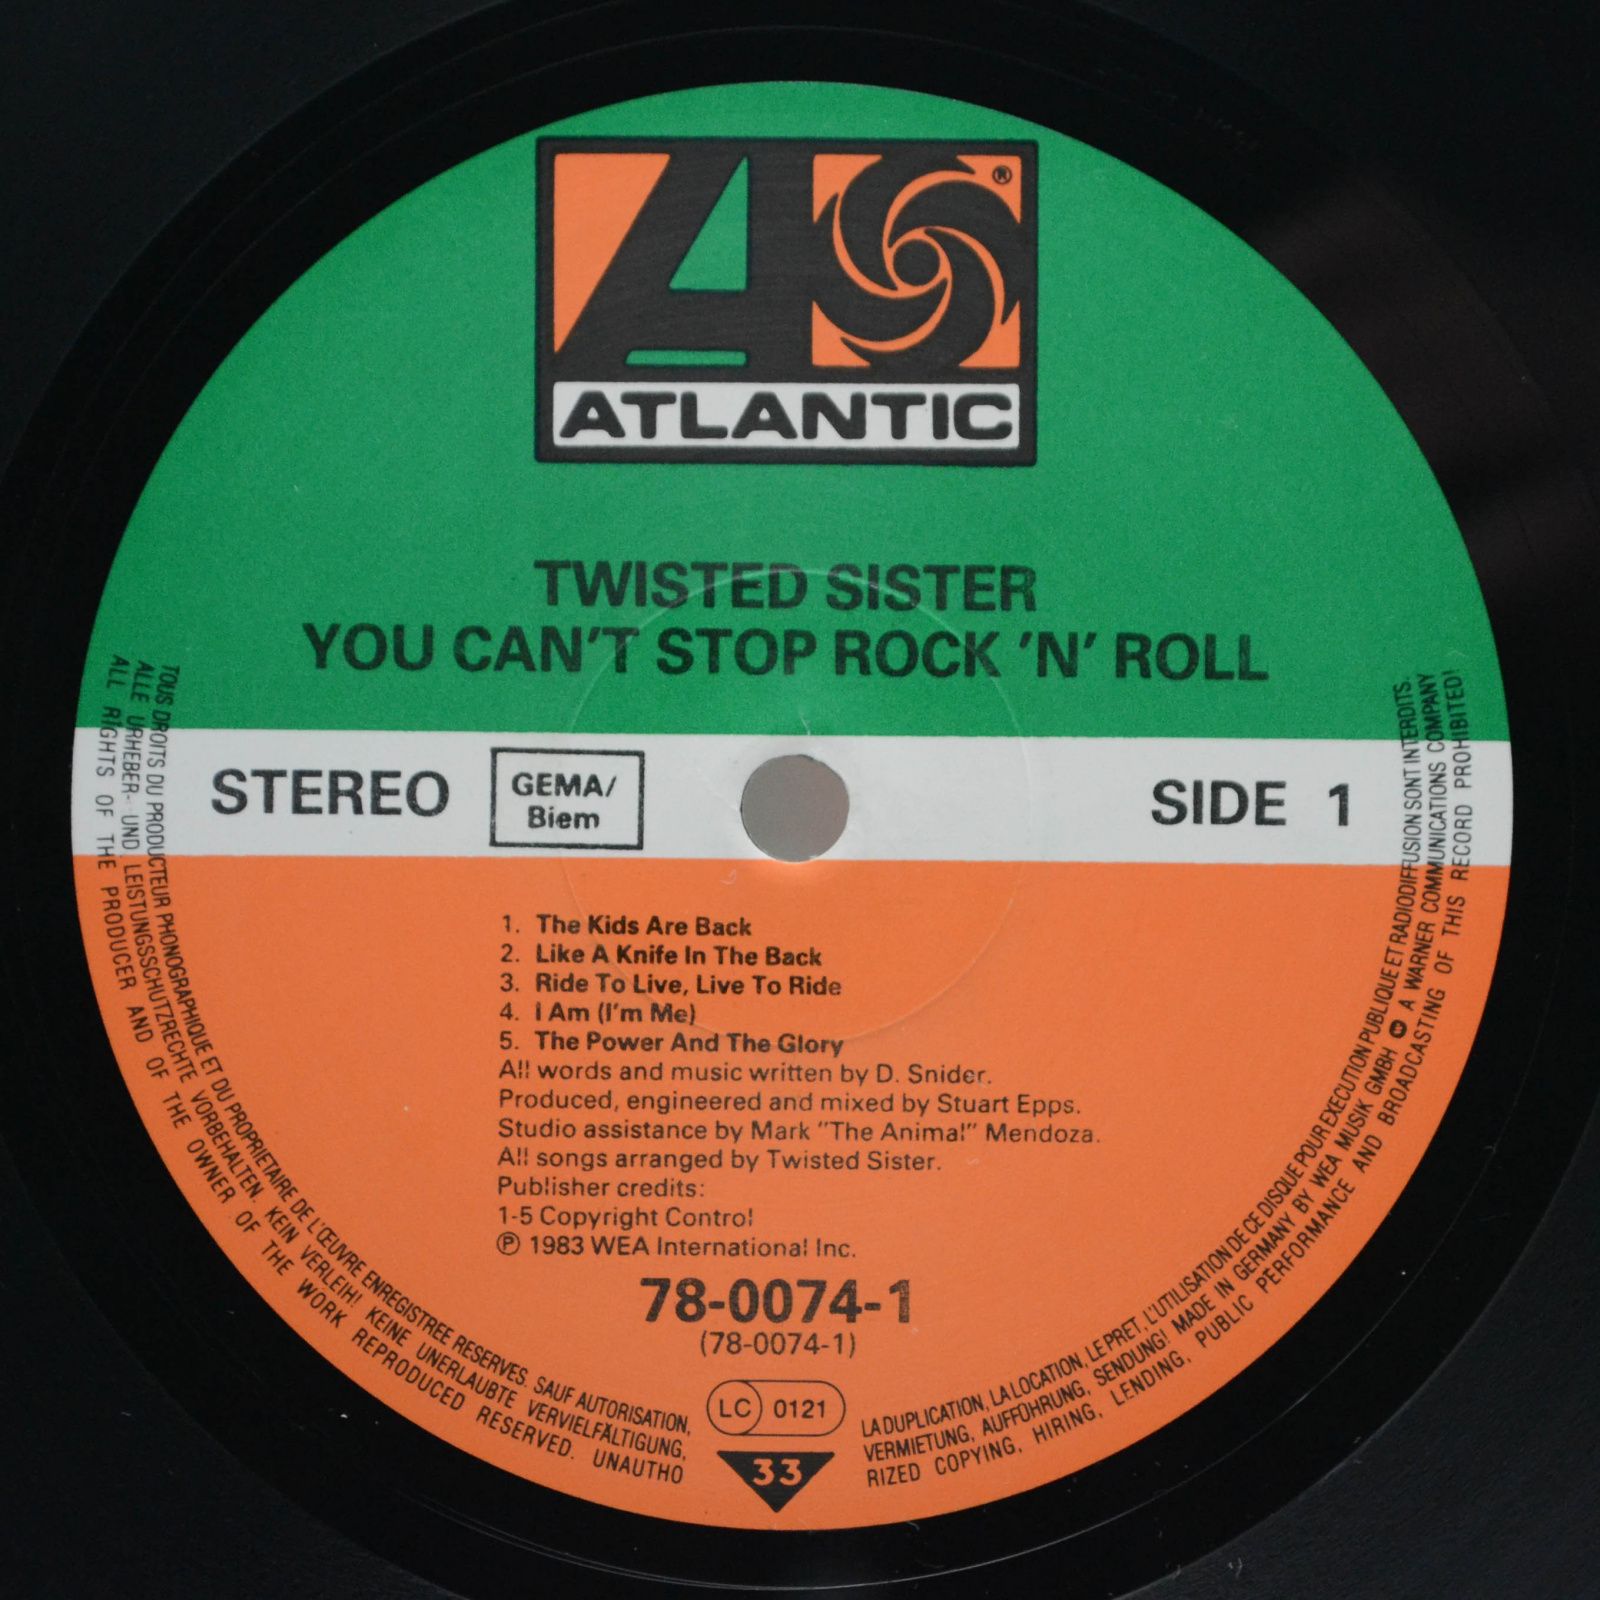 Twisted Sister — You Can't Stop Rock 'N' Roll, 1983